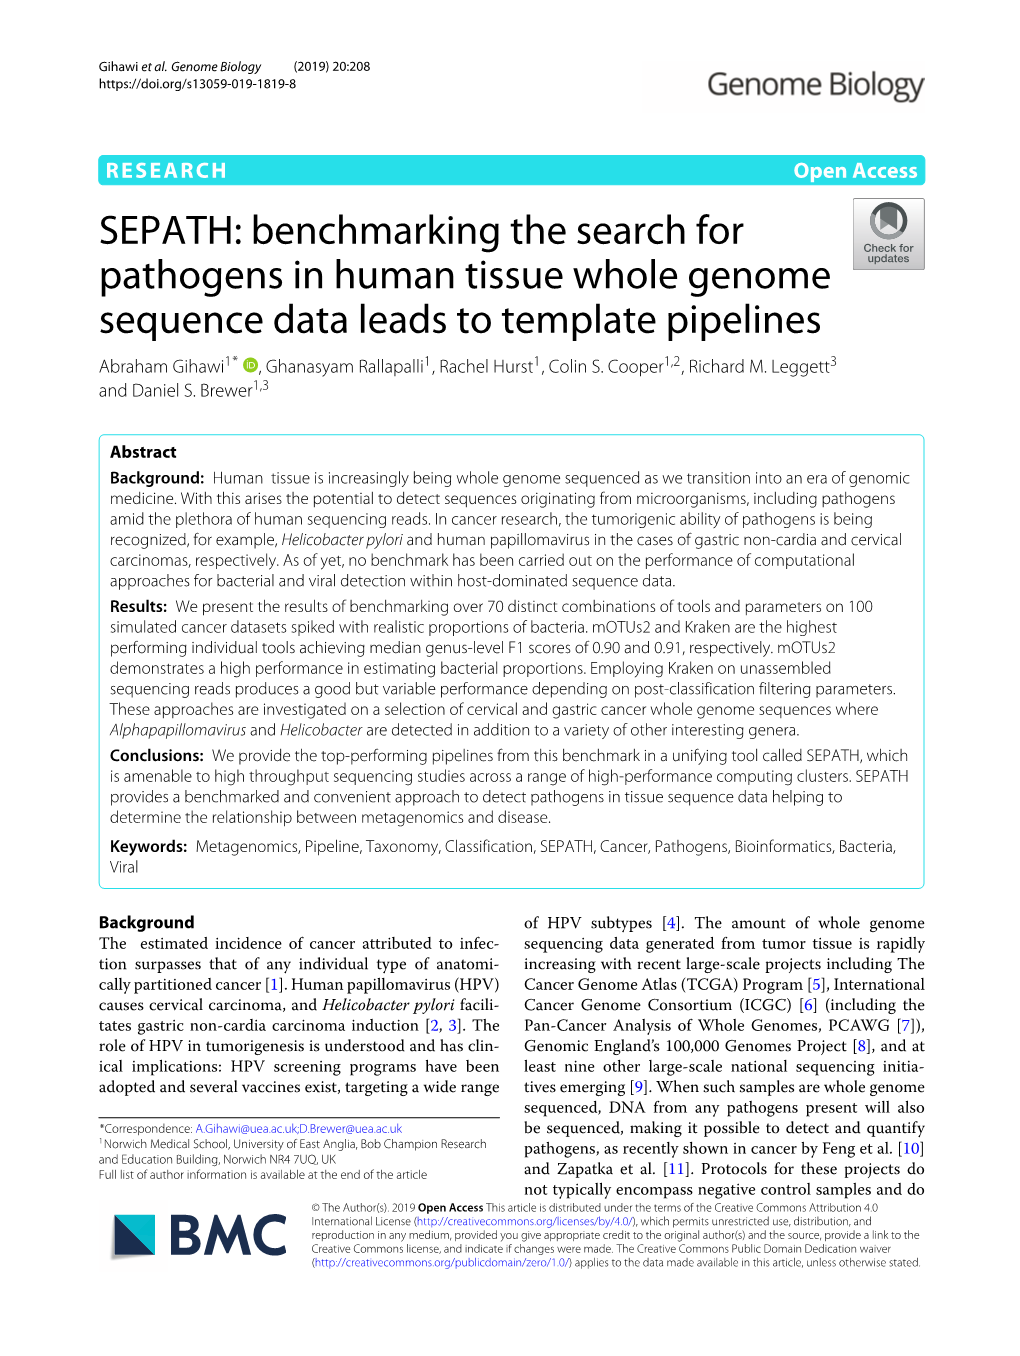 SEPATH: Benchmarking the Search for Pathogens In